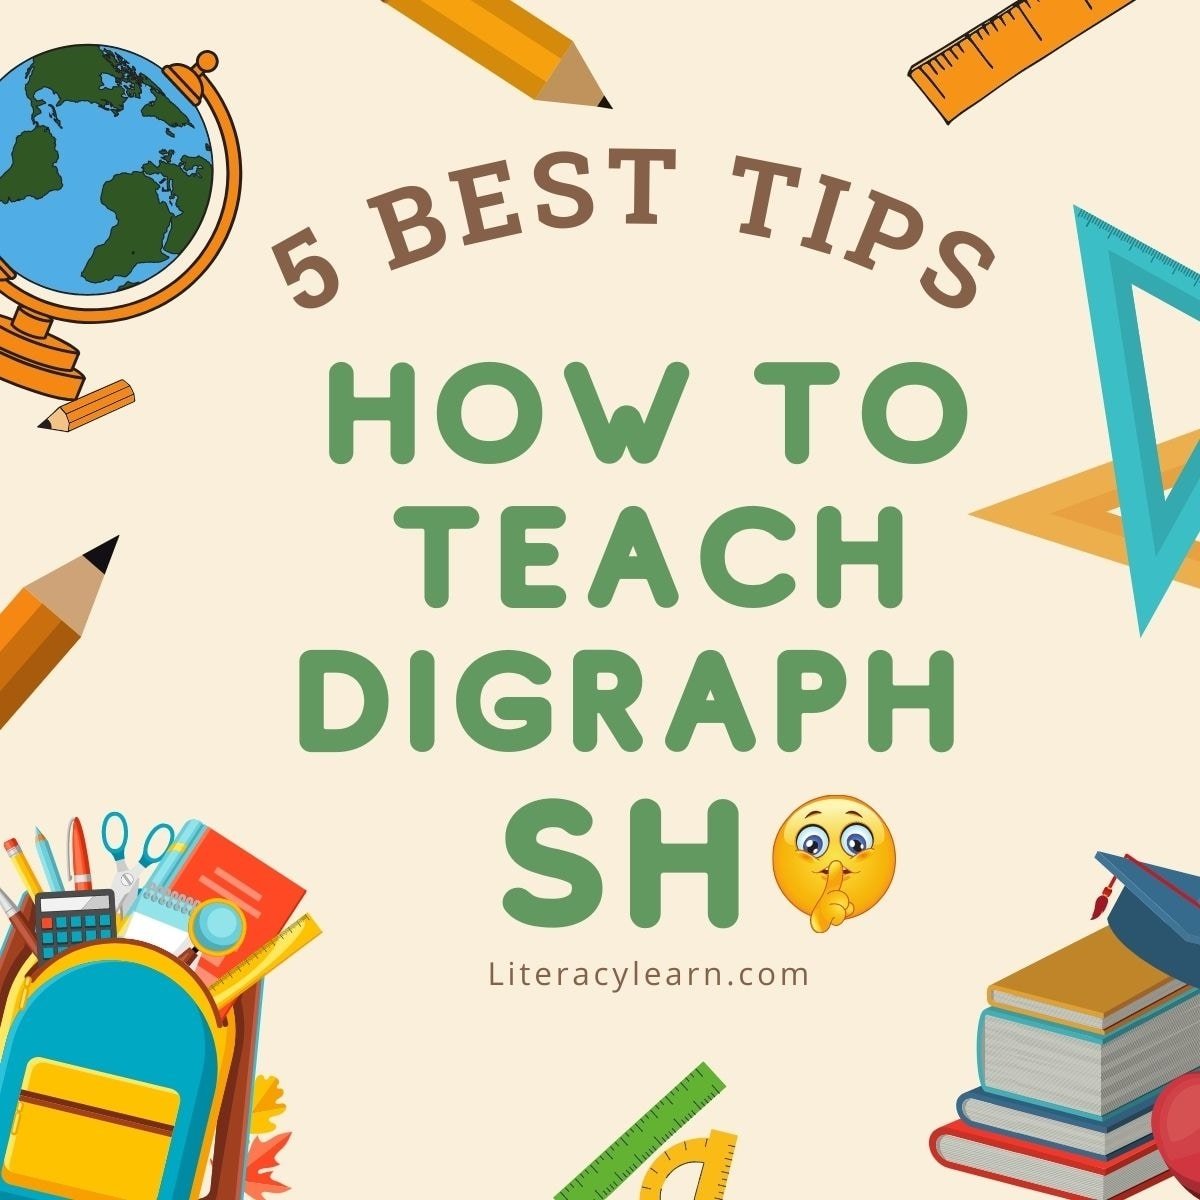 Graphic with words "Best Tips How To Teach Digraph SH" with images of school items.